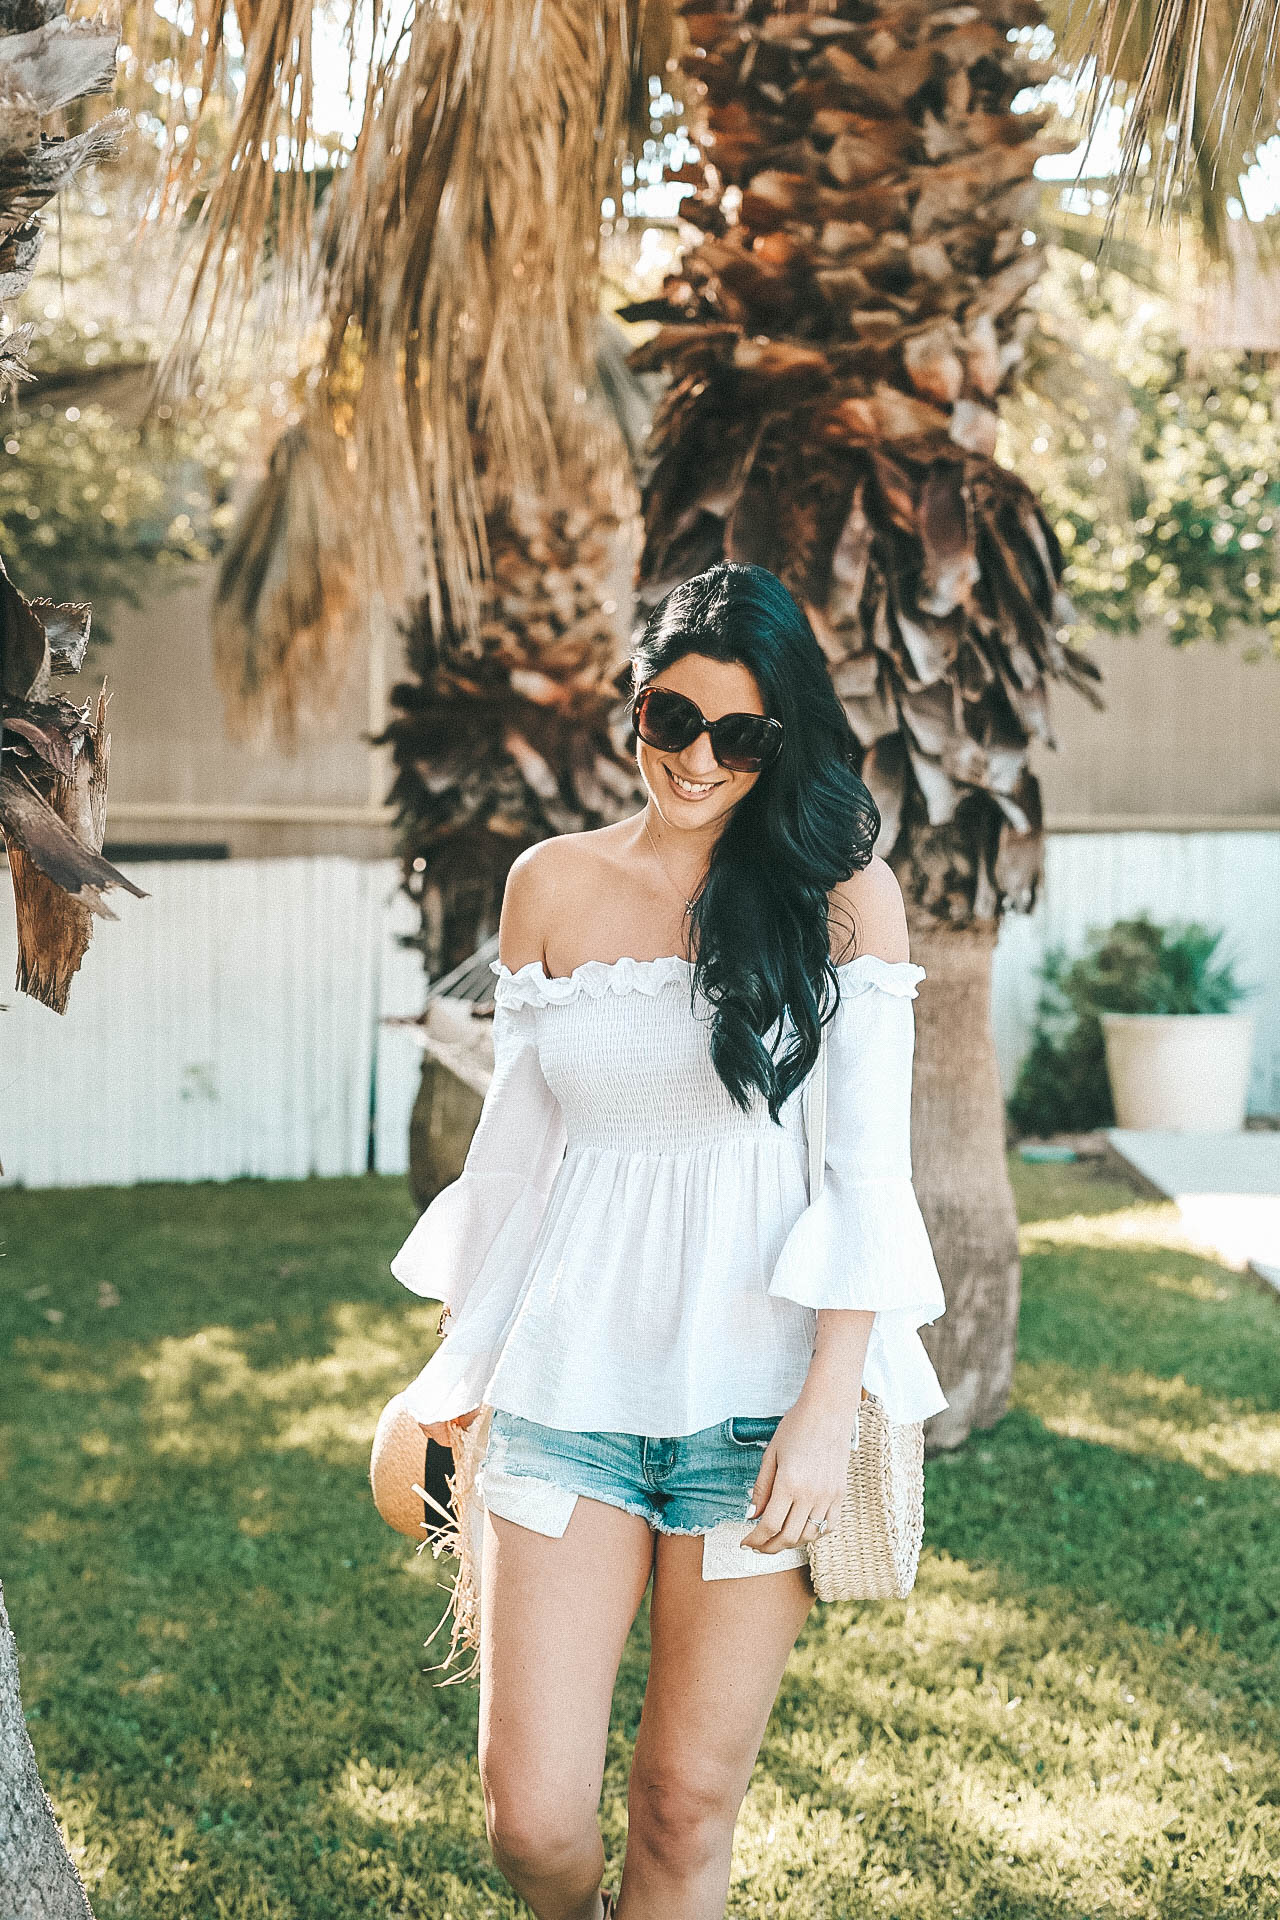 DTKAustin shares where to get the best white tops for summer from Chicwish that wont break the bank along with her frayed straw hat on sale. | summer tops for less | affordable summer style | summer fashion tips | summer style | white tops for summer || DTK Austin #fashion #style #summerstyle #summerfashion #womensfashion #summertops #affordablefashion #summeroutfits - {Affordable Summer Tops That Won't Break the Bank} featured by popular Austin fashion blogger, Dressed to Kill - {Affordable Summer Tops That Won't Break the Bank} featured by popular Austin fashion blogger, Dressed to Kill